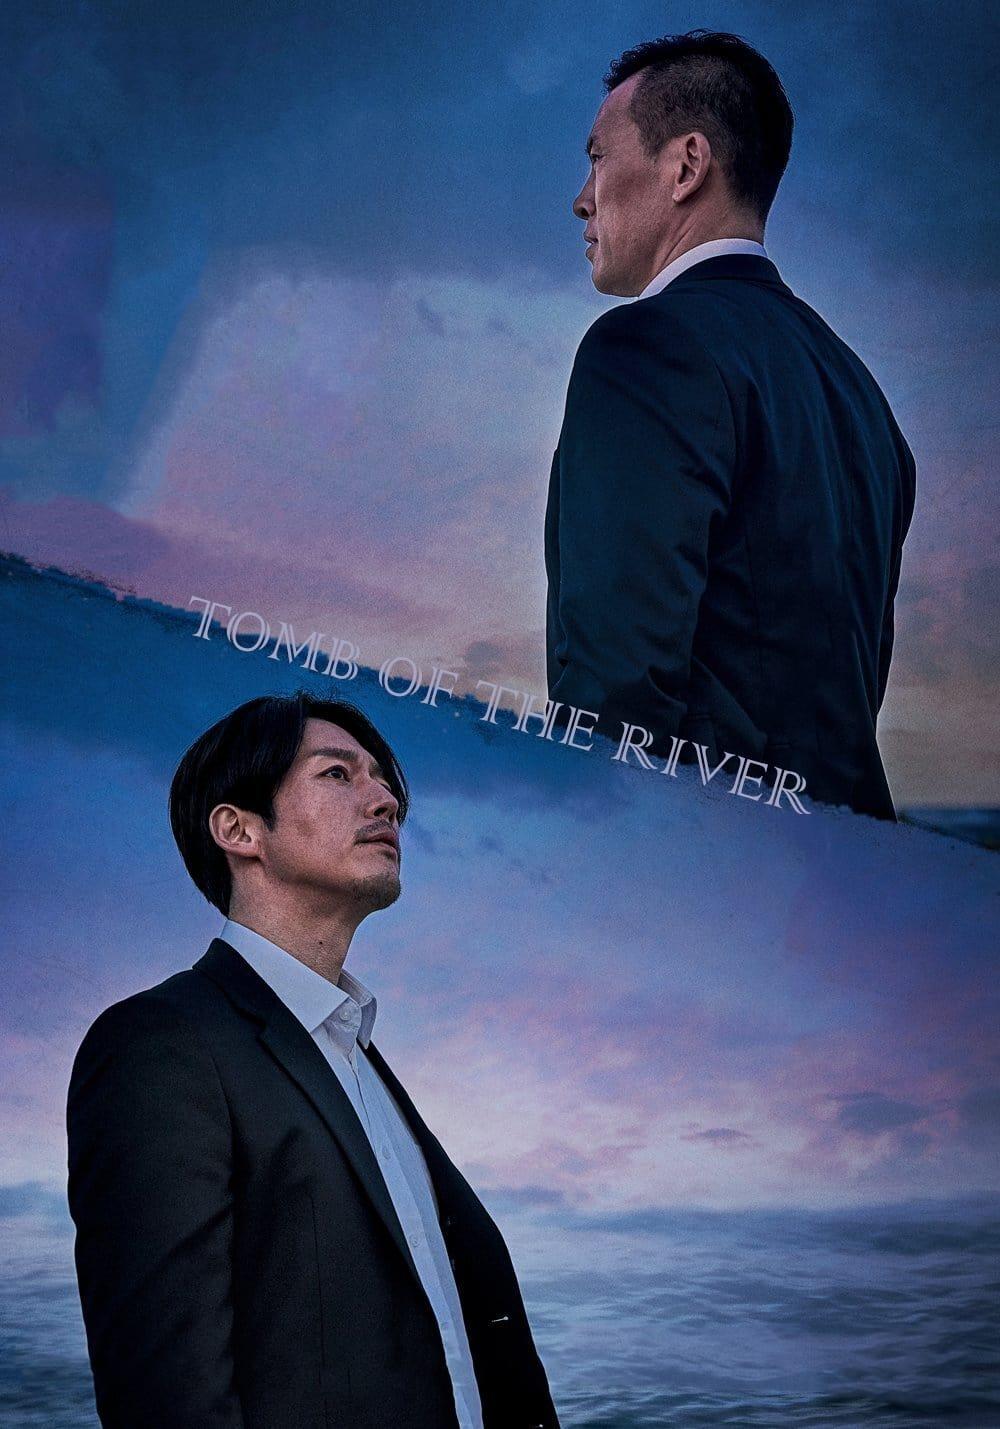 Tomb of the River poster